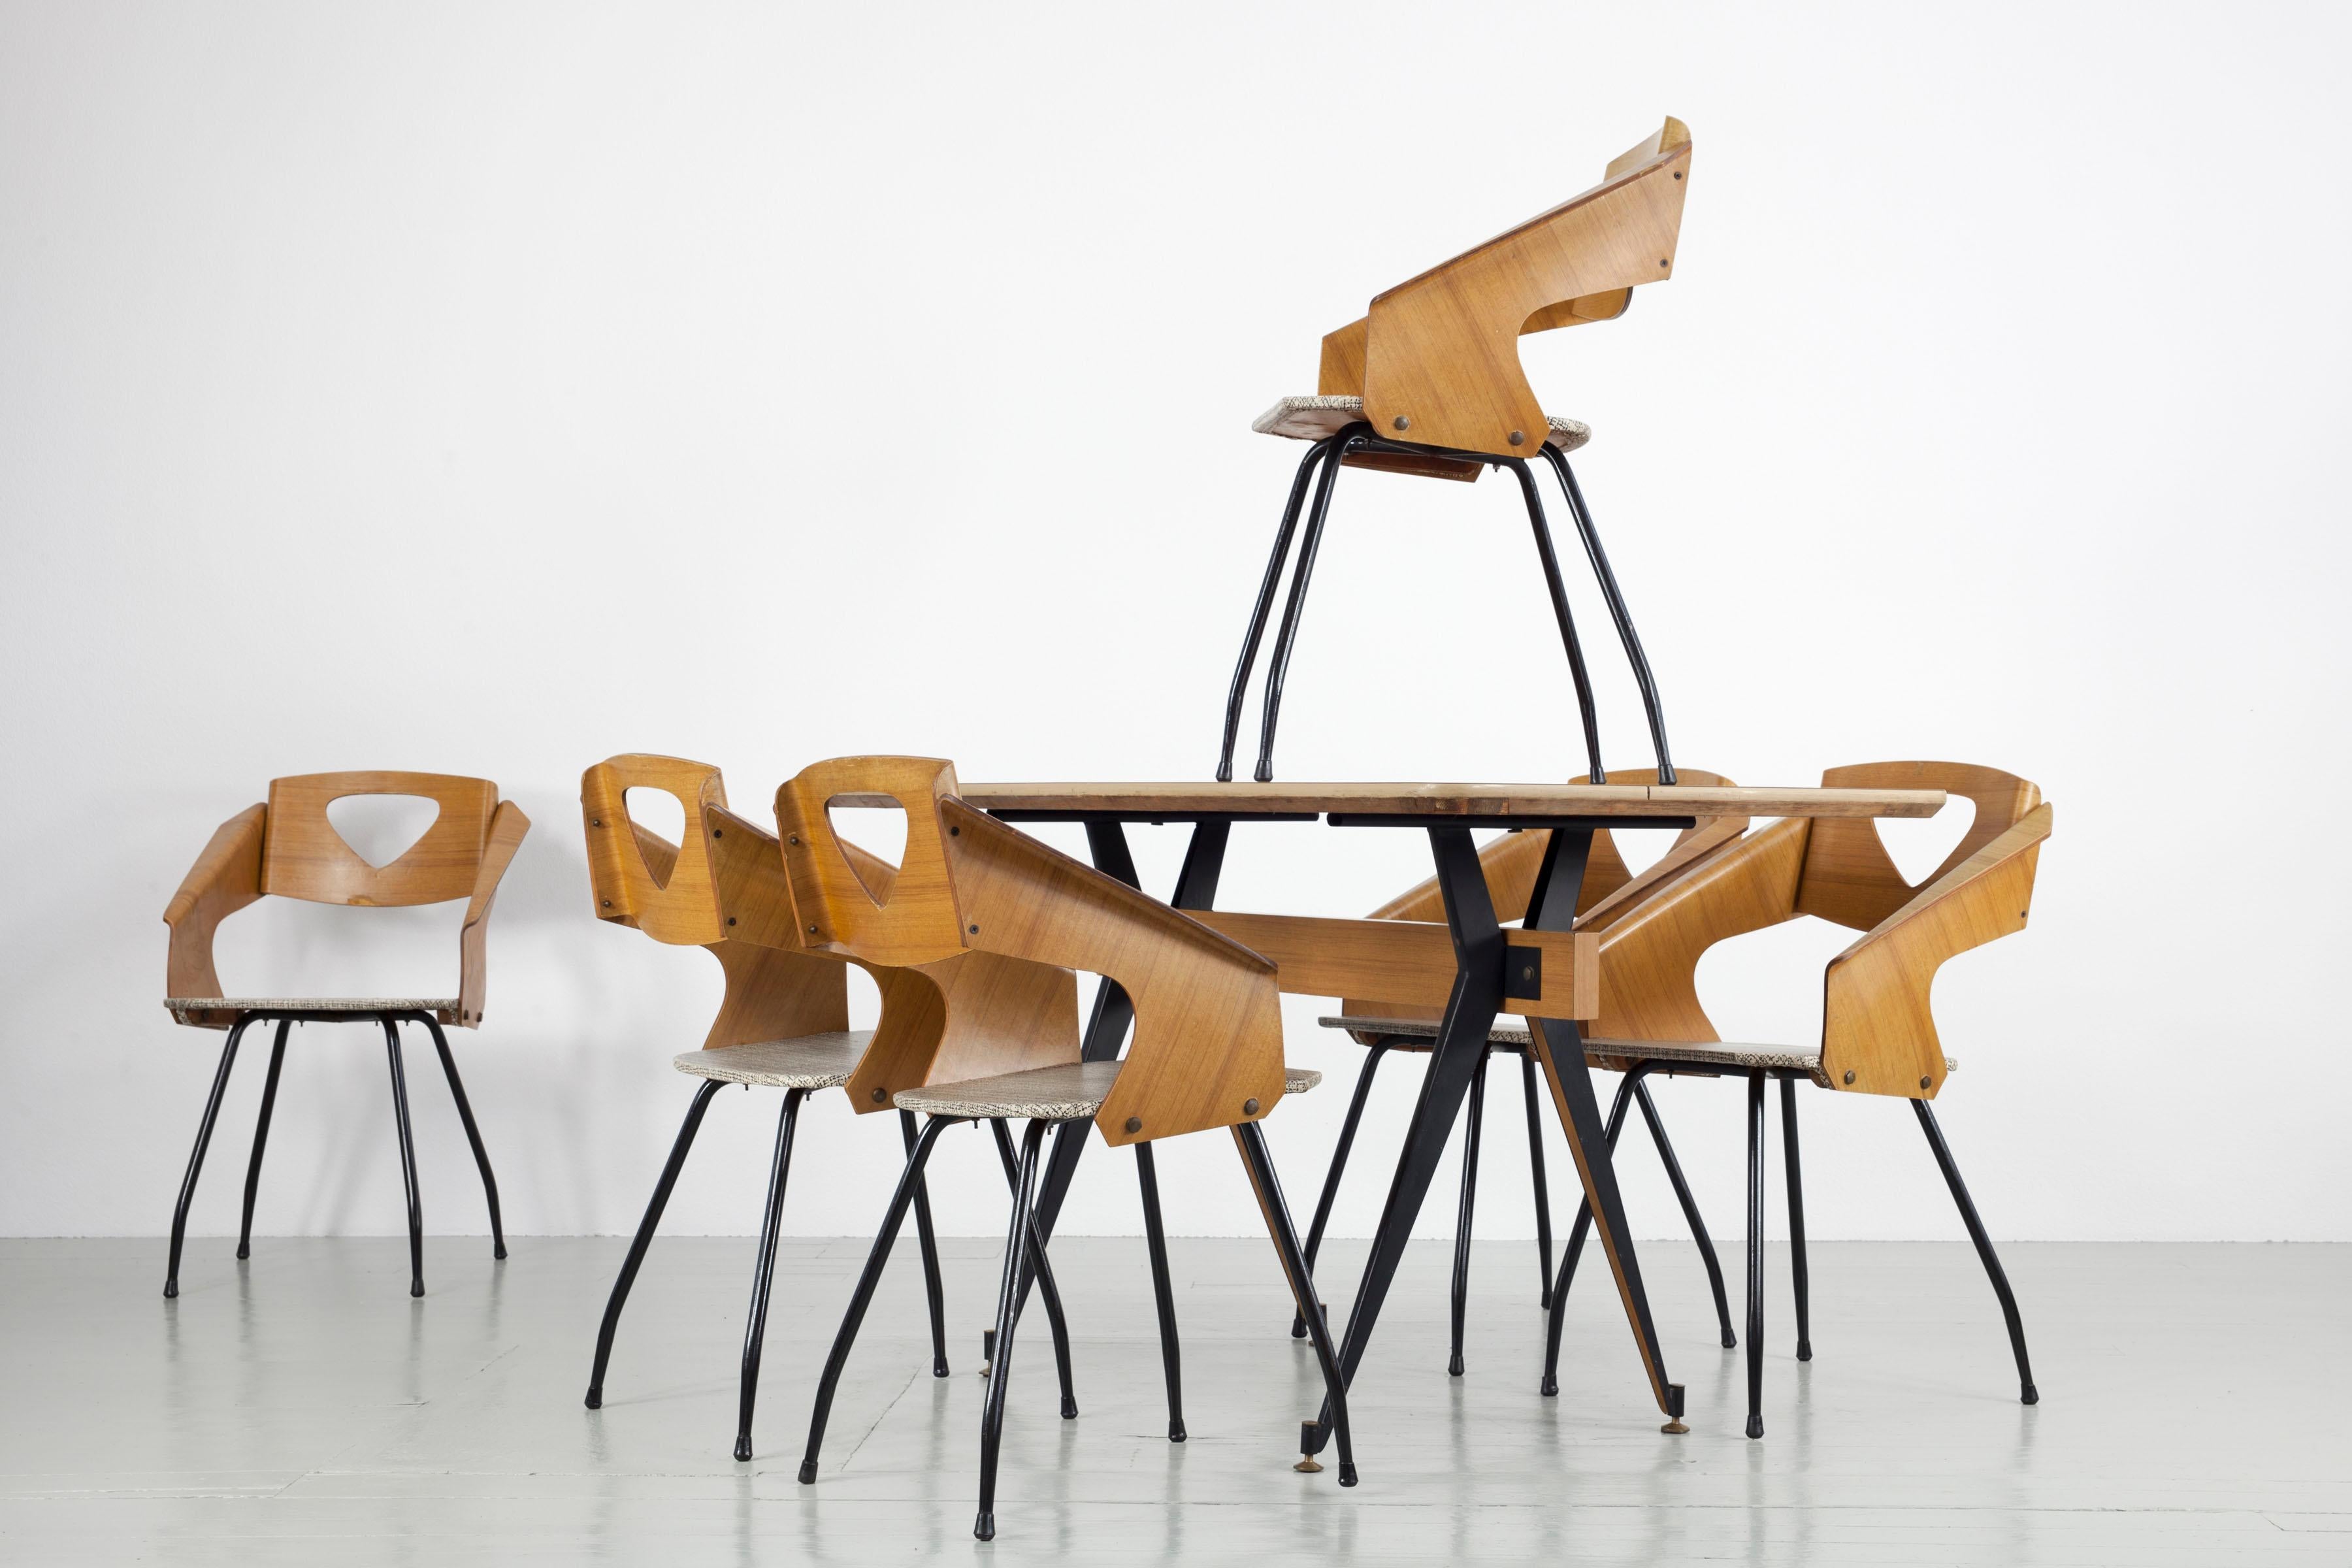 Iron Set of 6 Dining Chairs and Table by Carlo Ratti, 1950s For Sale